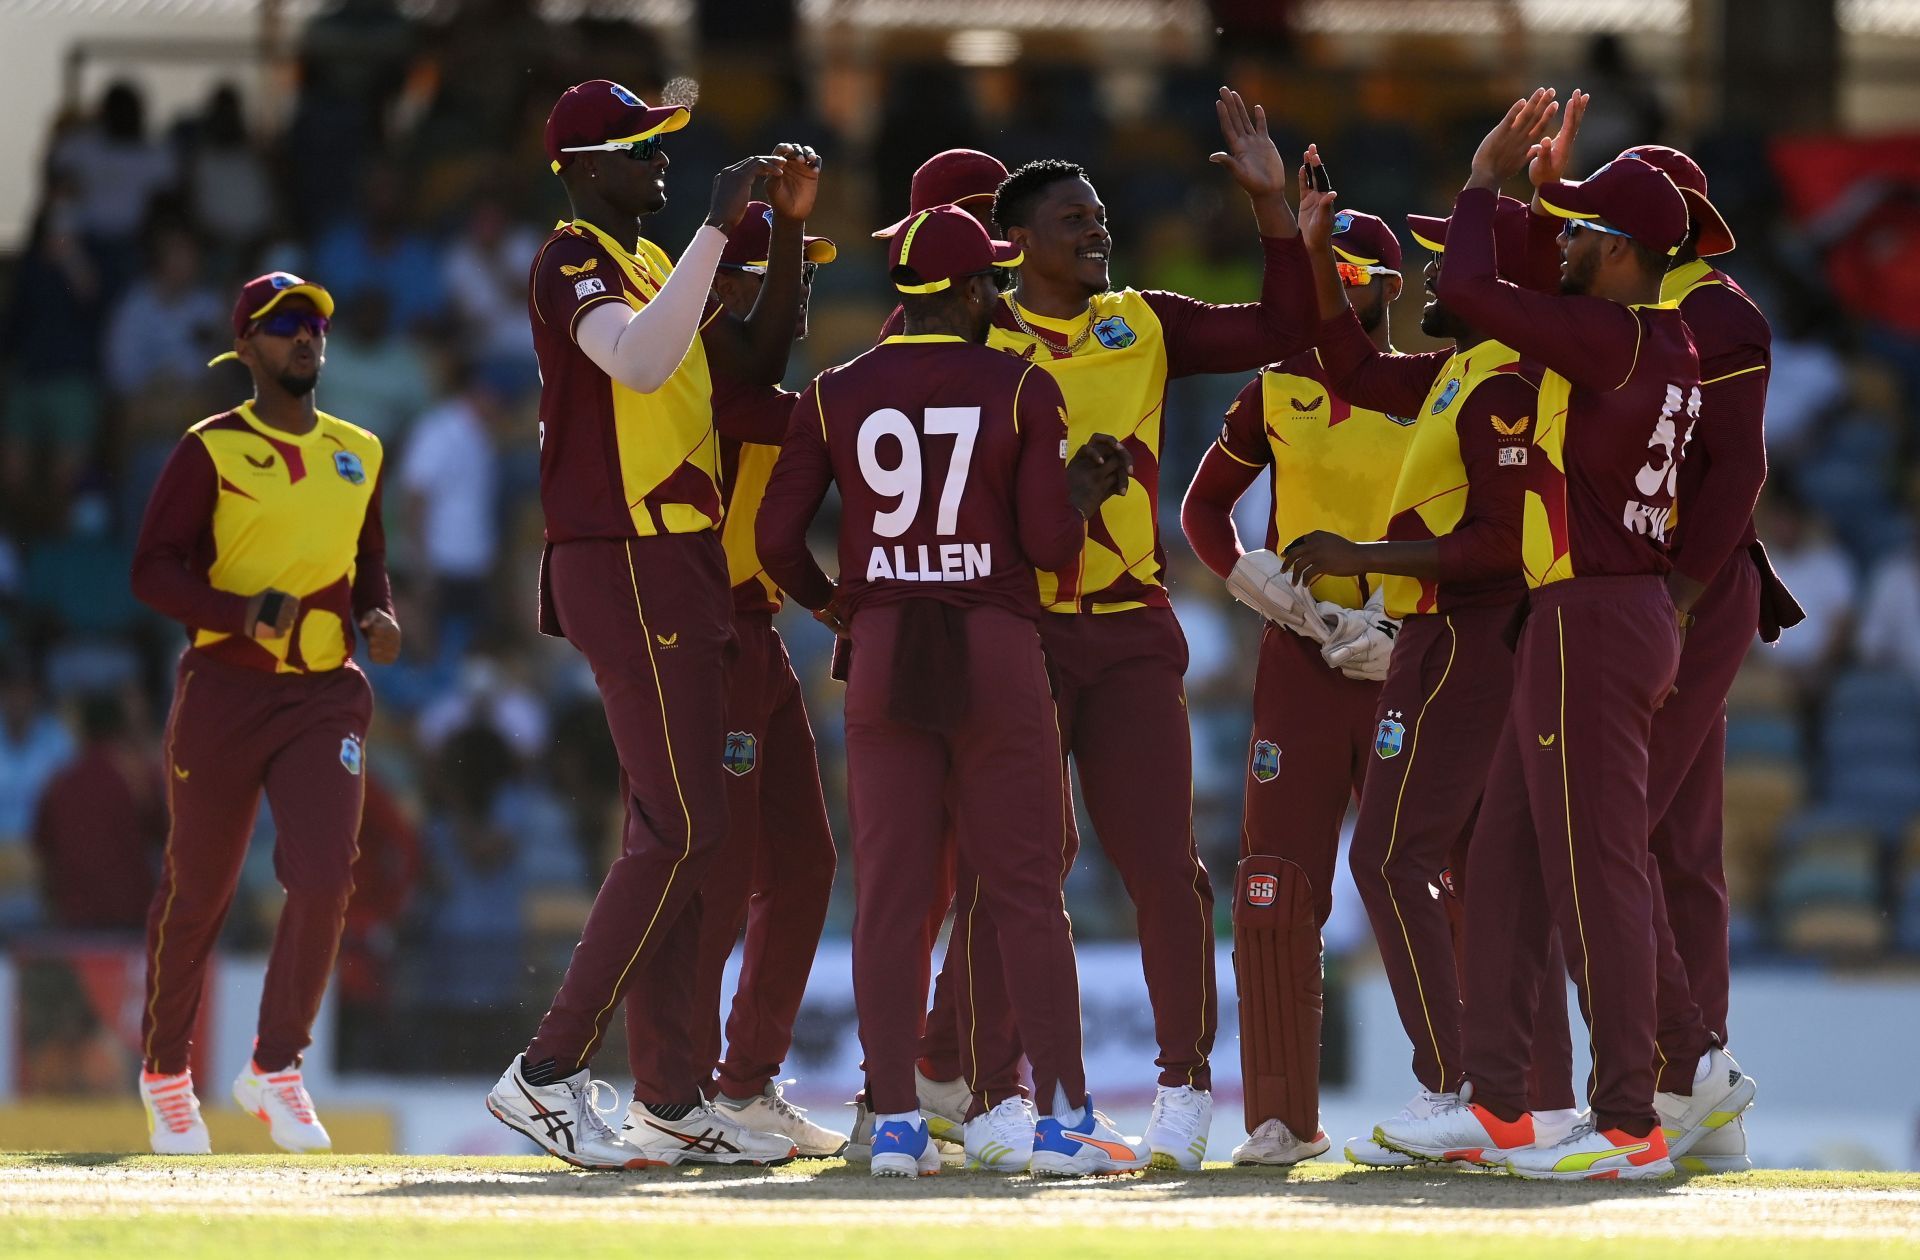 Snap from the first T20I between West Indies and England.